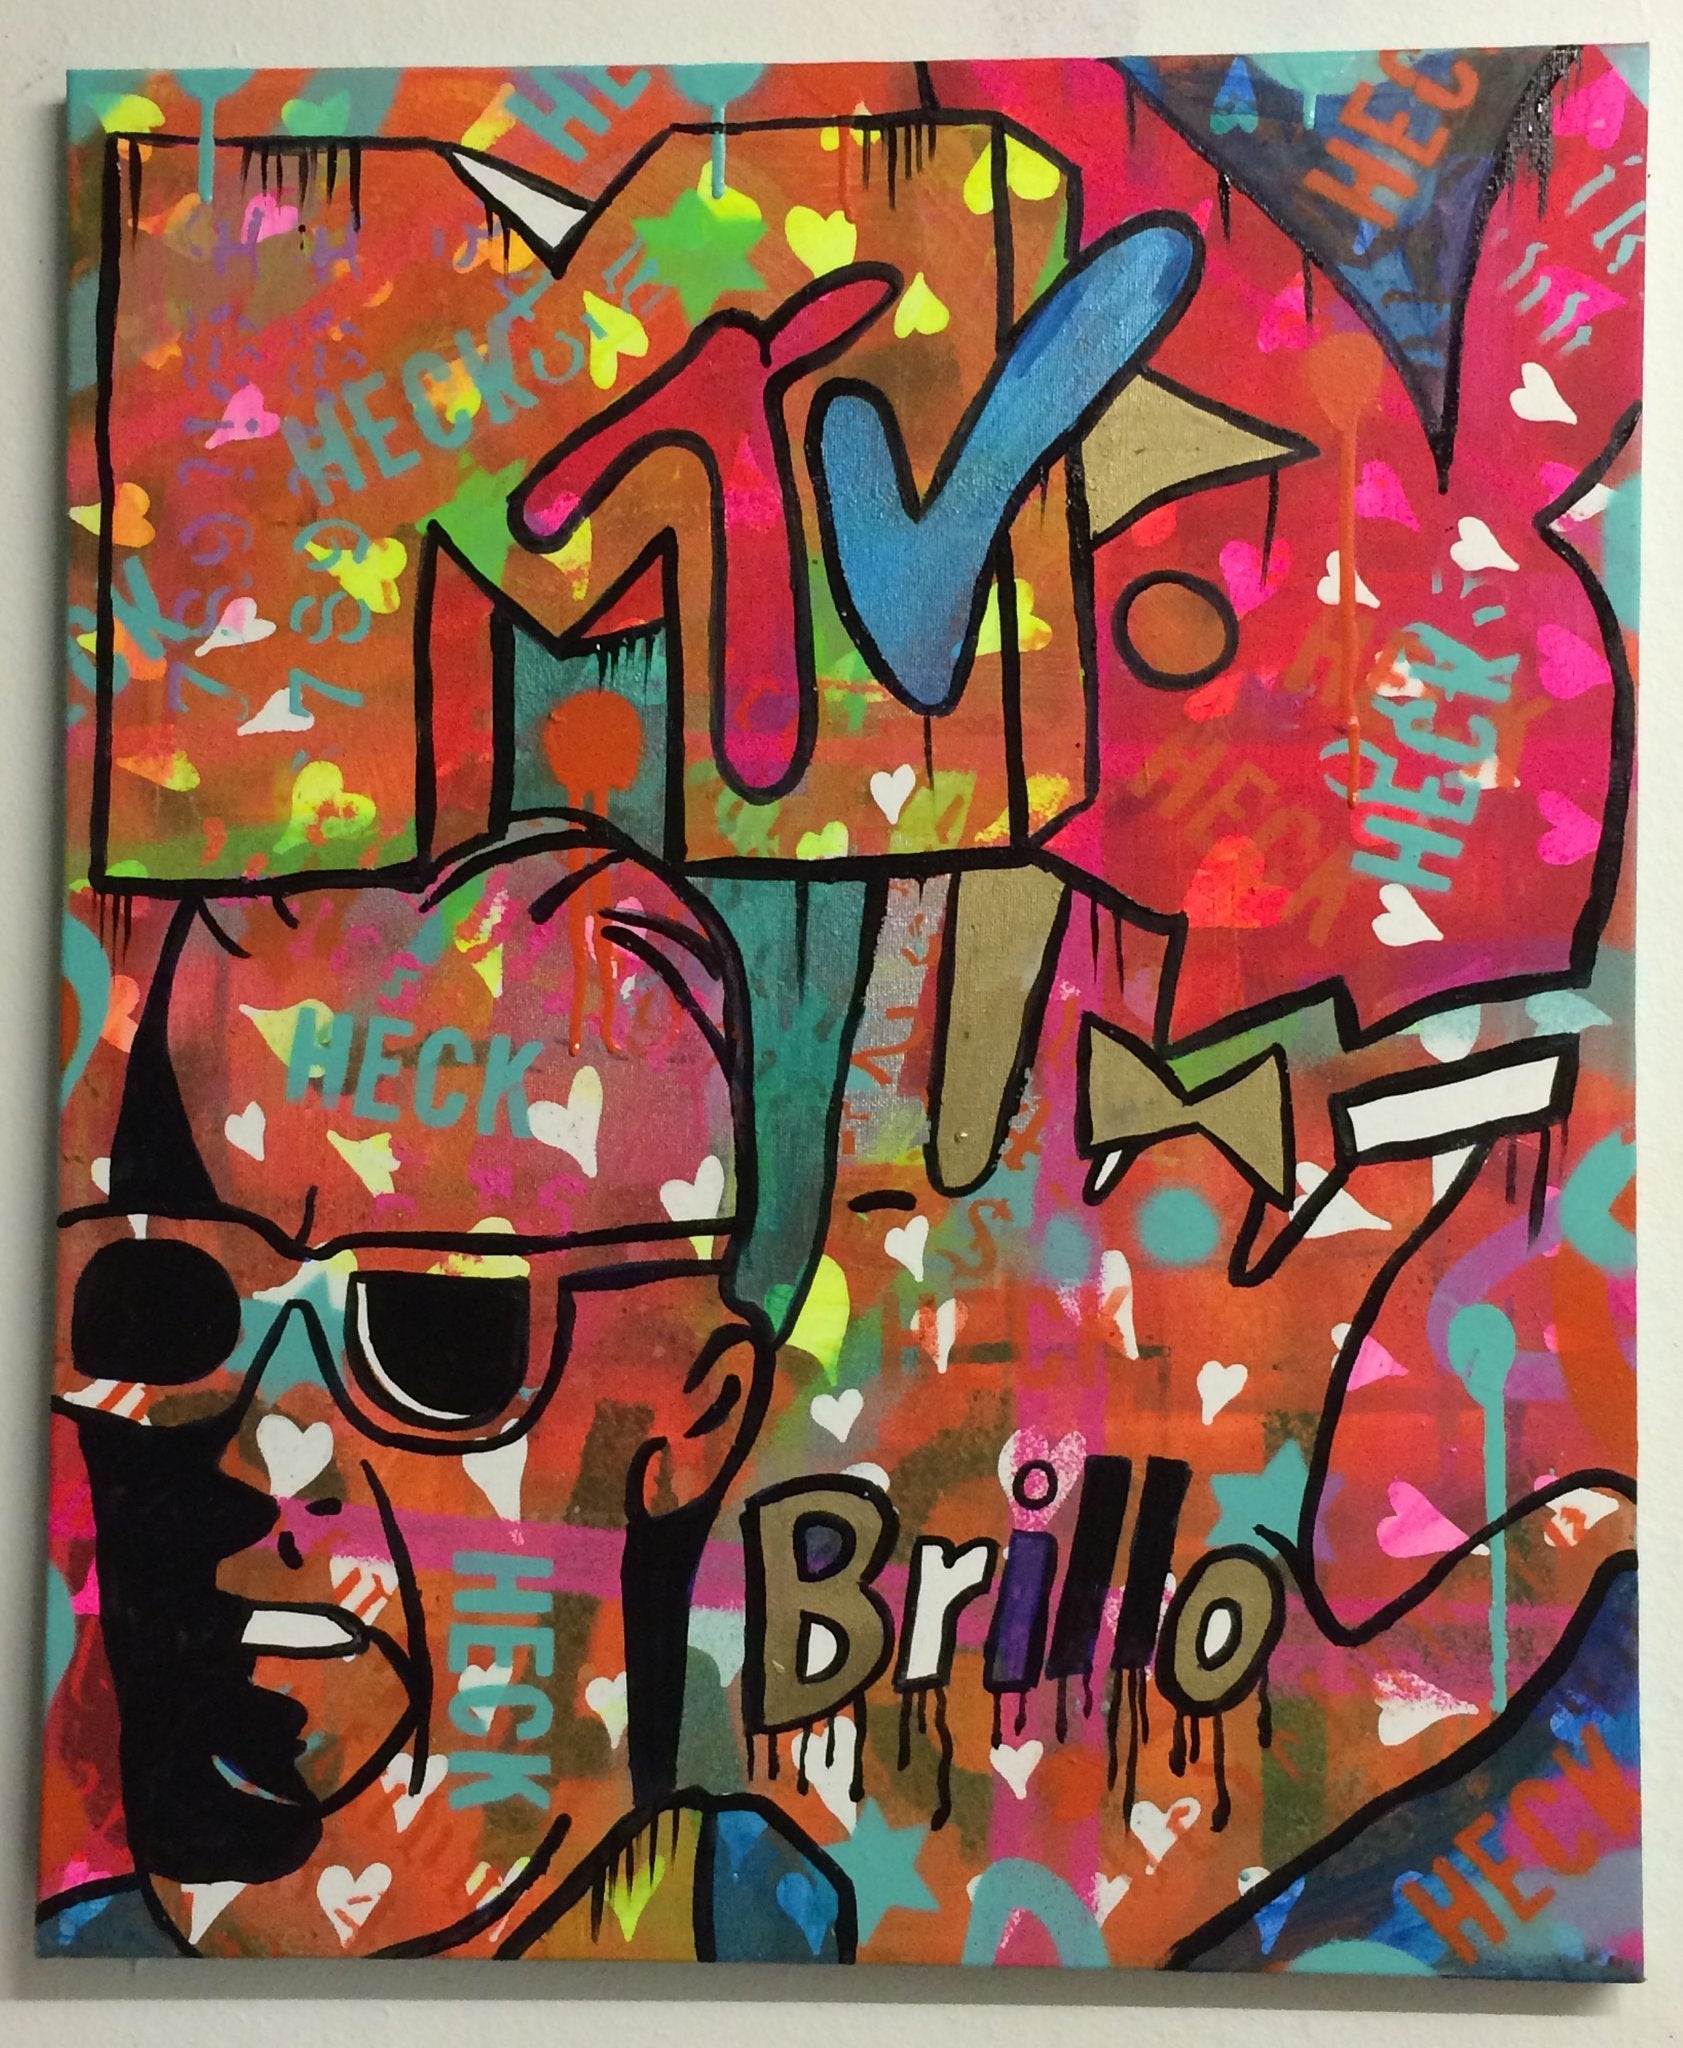 Electric Dreams Short Circuit by Barrie J Davies 2015, mixed media on canvas, 50cm x 60cm, unframed. Barrie J Davies is an Artist - Psychedelic pop surreal street art inspired Artist based in Brighton England UK - Paintings, Prints & Editions available.